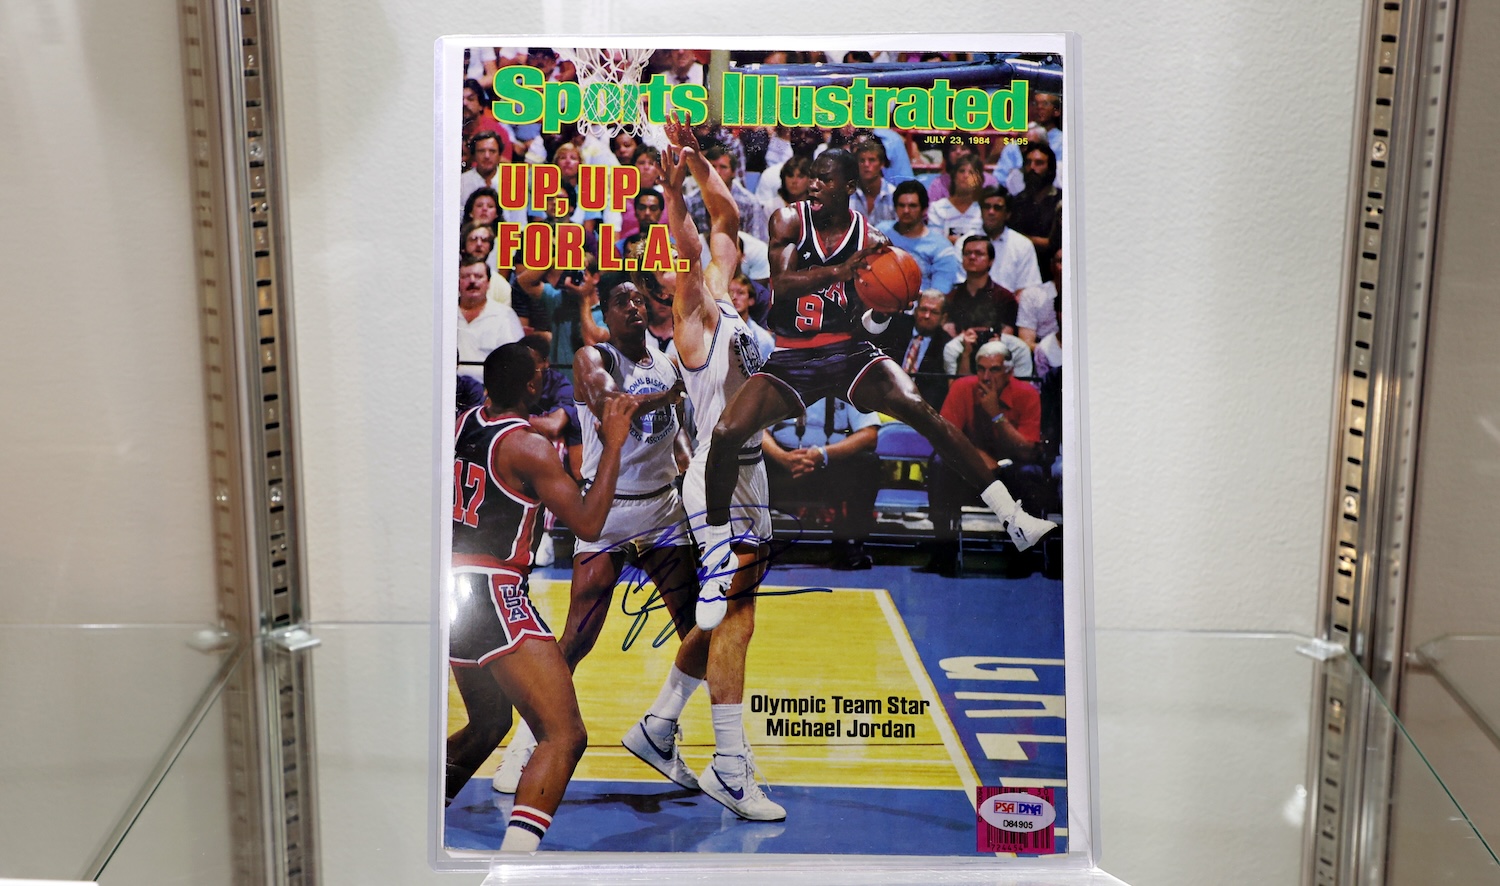 NEW YORK, NEW YORK - JULY 21: Michael Jordan signed Sports Illustrated cover is on display during a press preview of The Olympic Collection at Sotheby's on July 21, 2021 in New York City. (Photo by Cindy Ord/Getty Images)